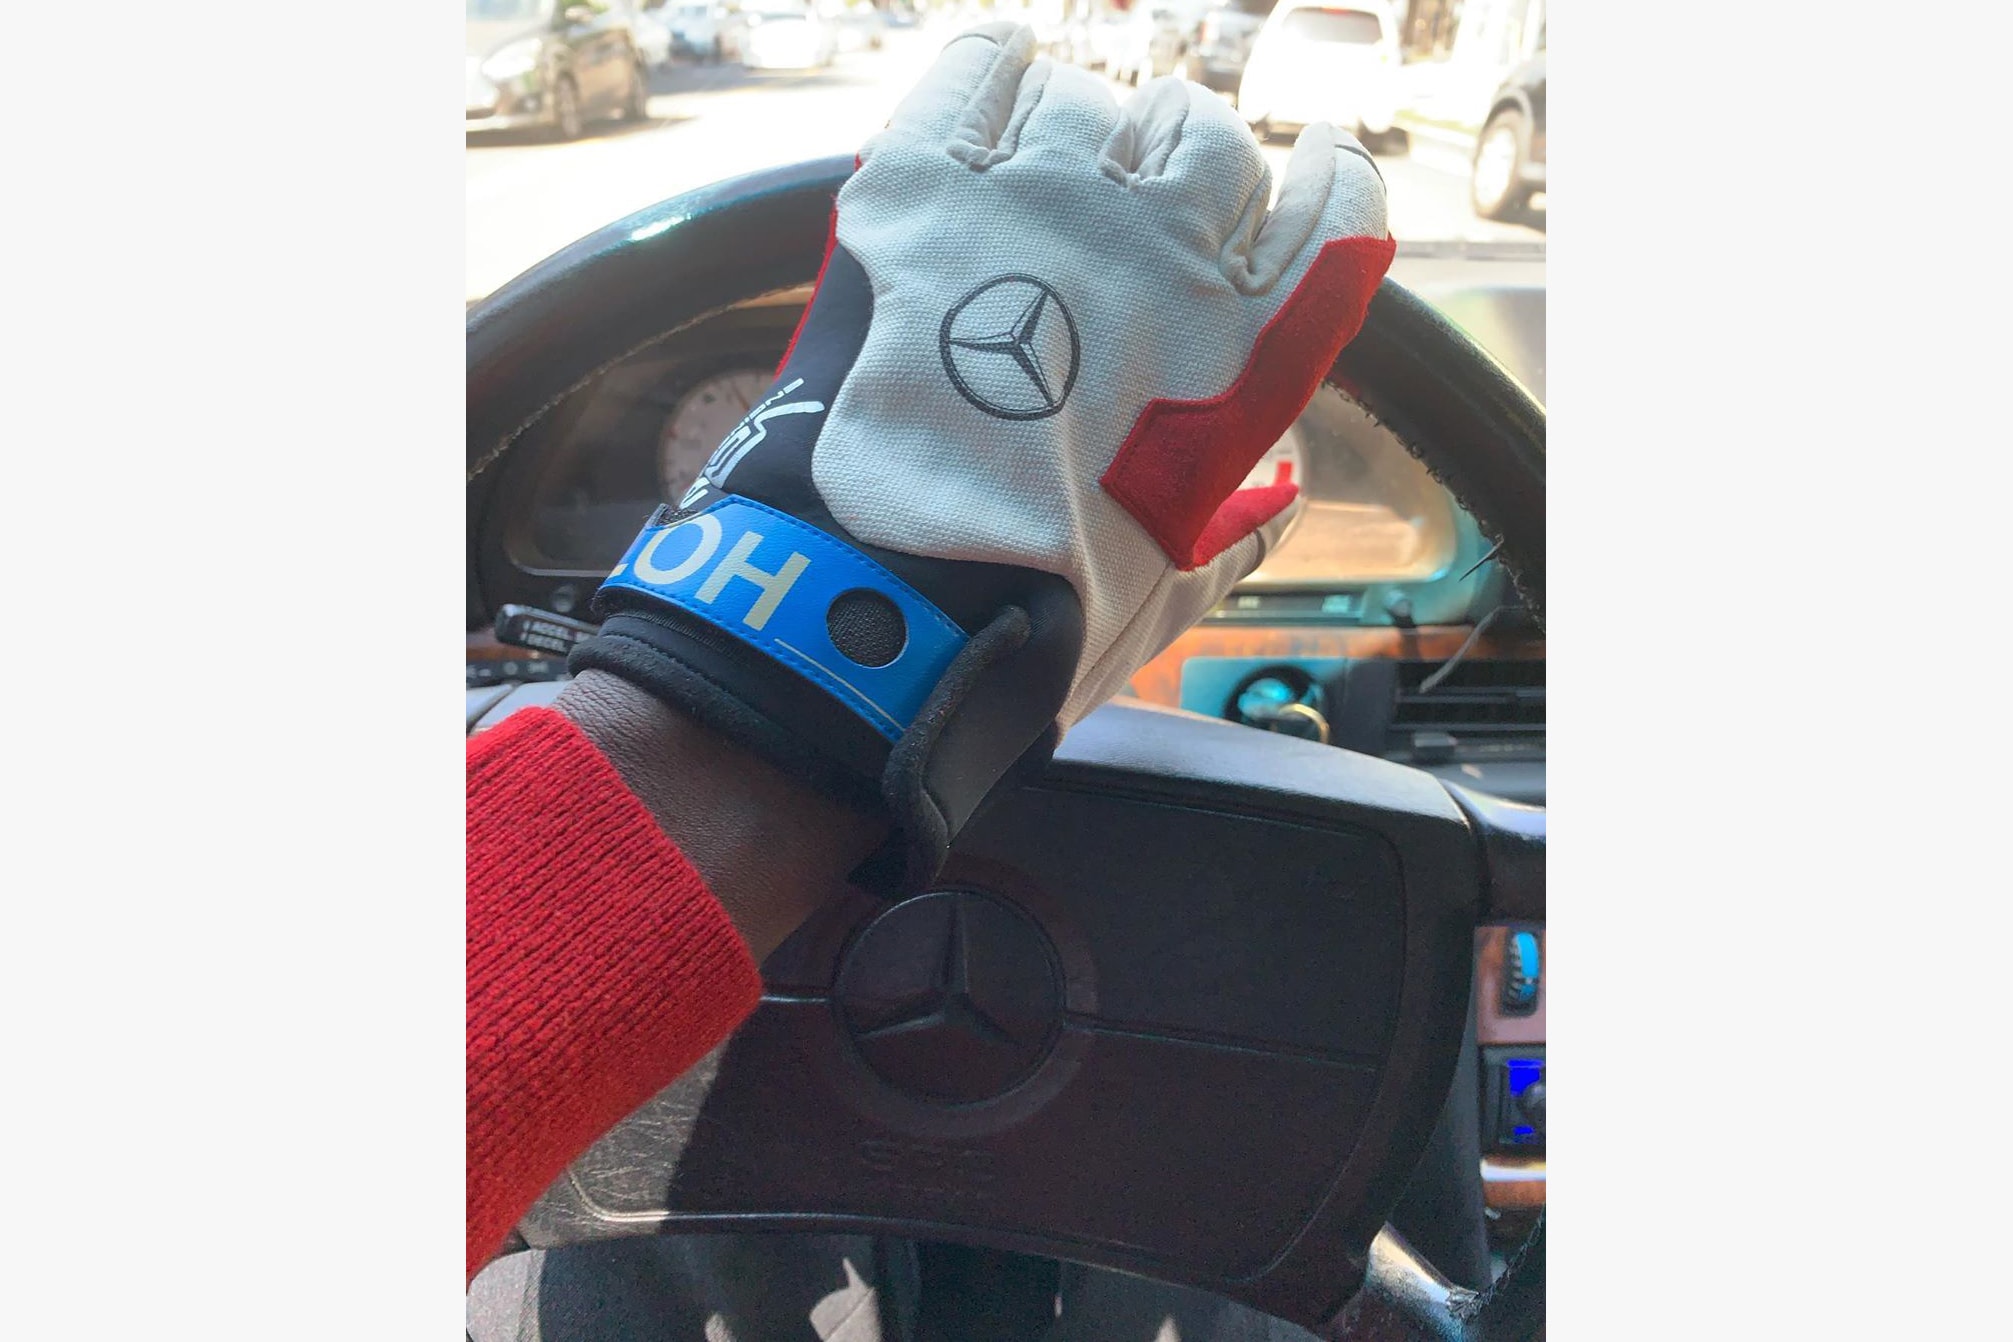 A$AP Nast がヴァージル・アブロー x Mercedes-Benz のレーシンググローブを公開 A$AP Nast Gifts Virgil Abloh Mercedes-Benz Racing Gloves G-Wagon S class racing style fashion ASAP NAST Instagram Classic cars 